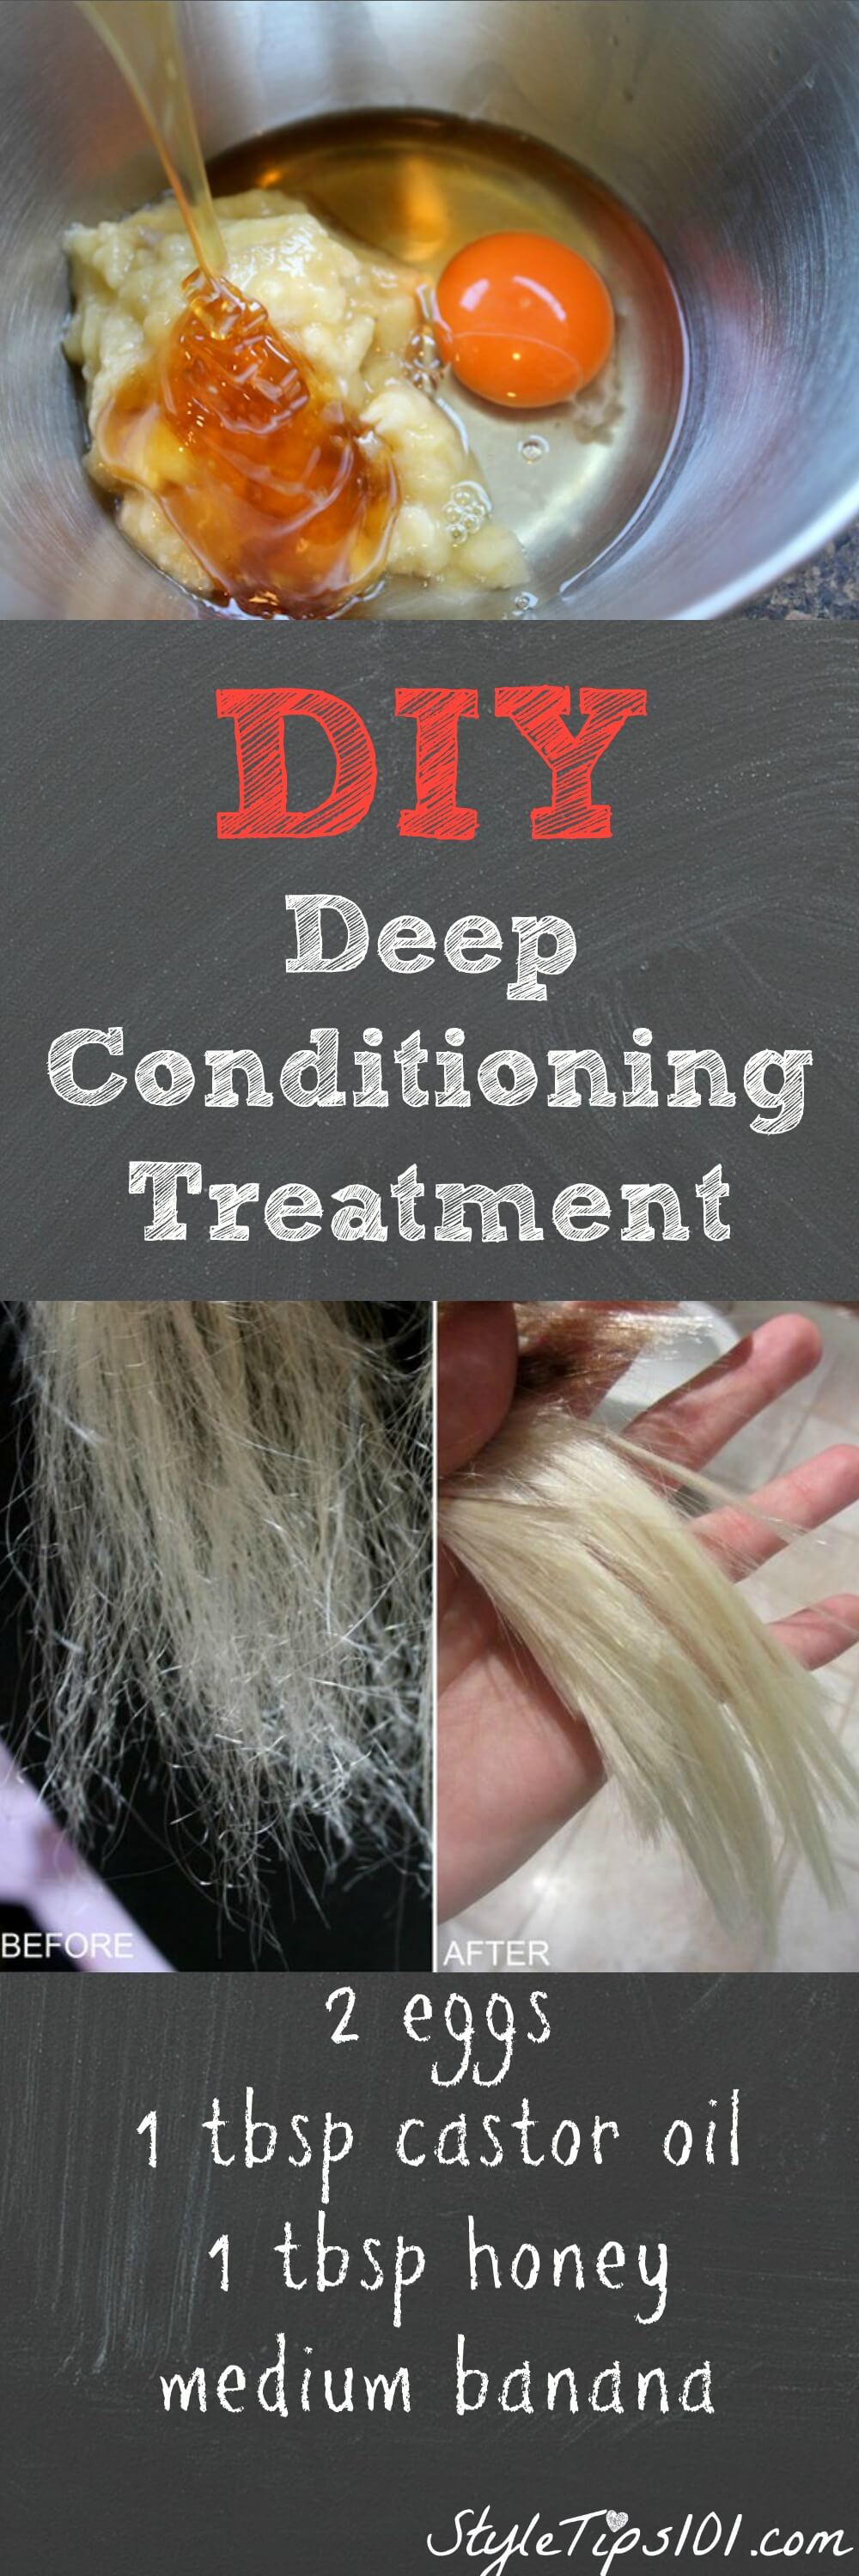 Homemade Deep Conditioning Treatment with Eggs and Honey